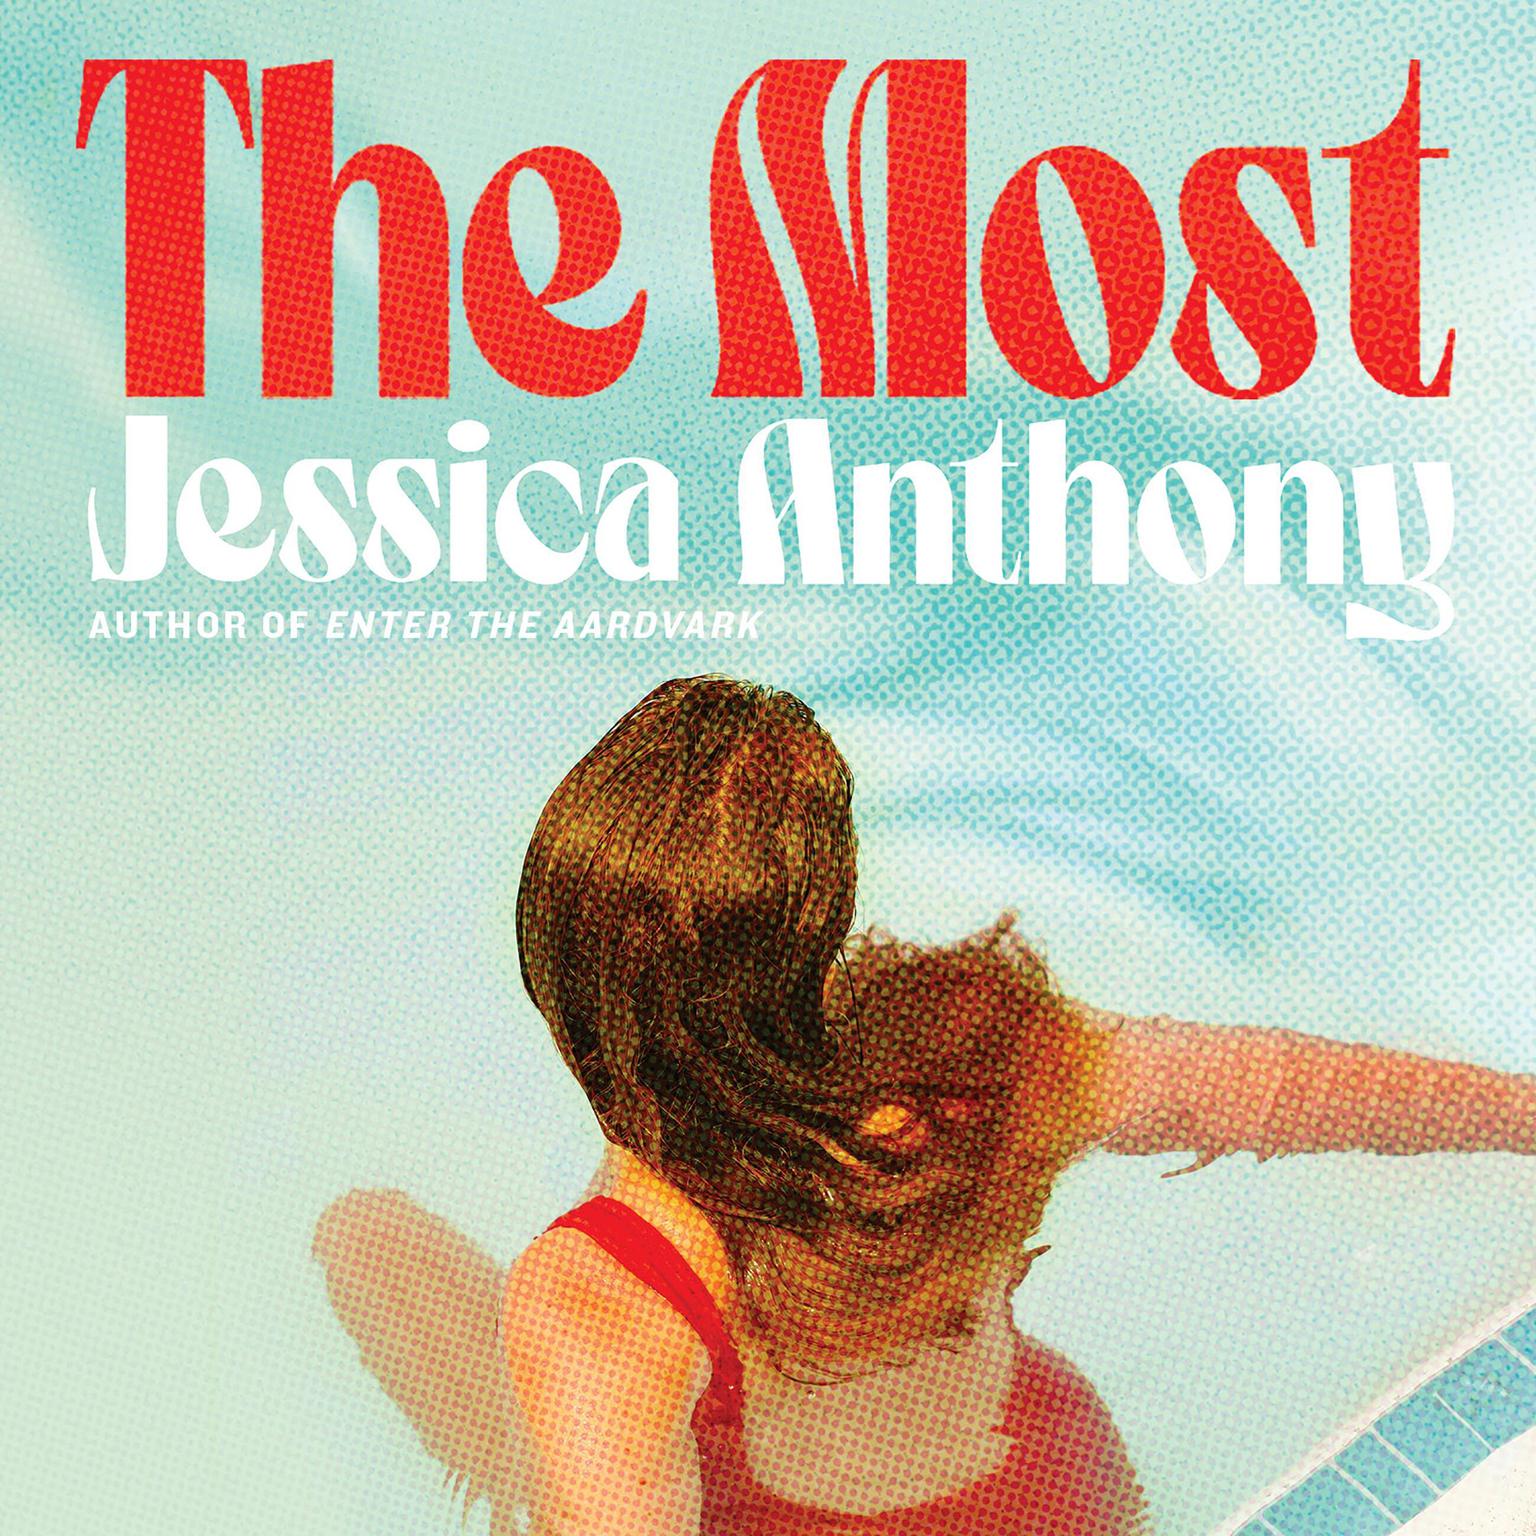 The Most Audiobook, by Jessica Anthony